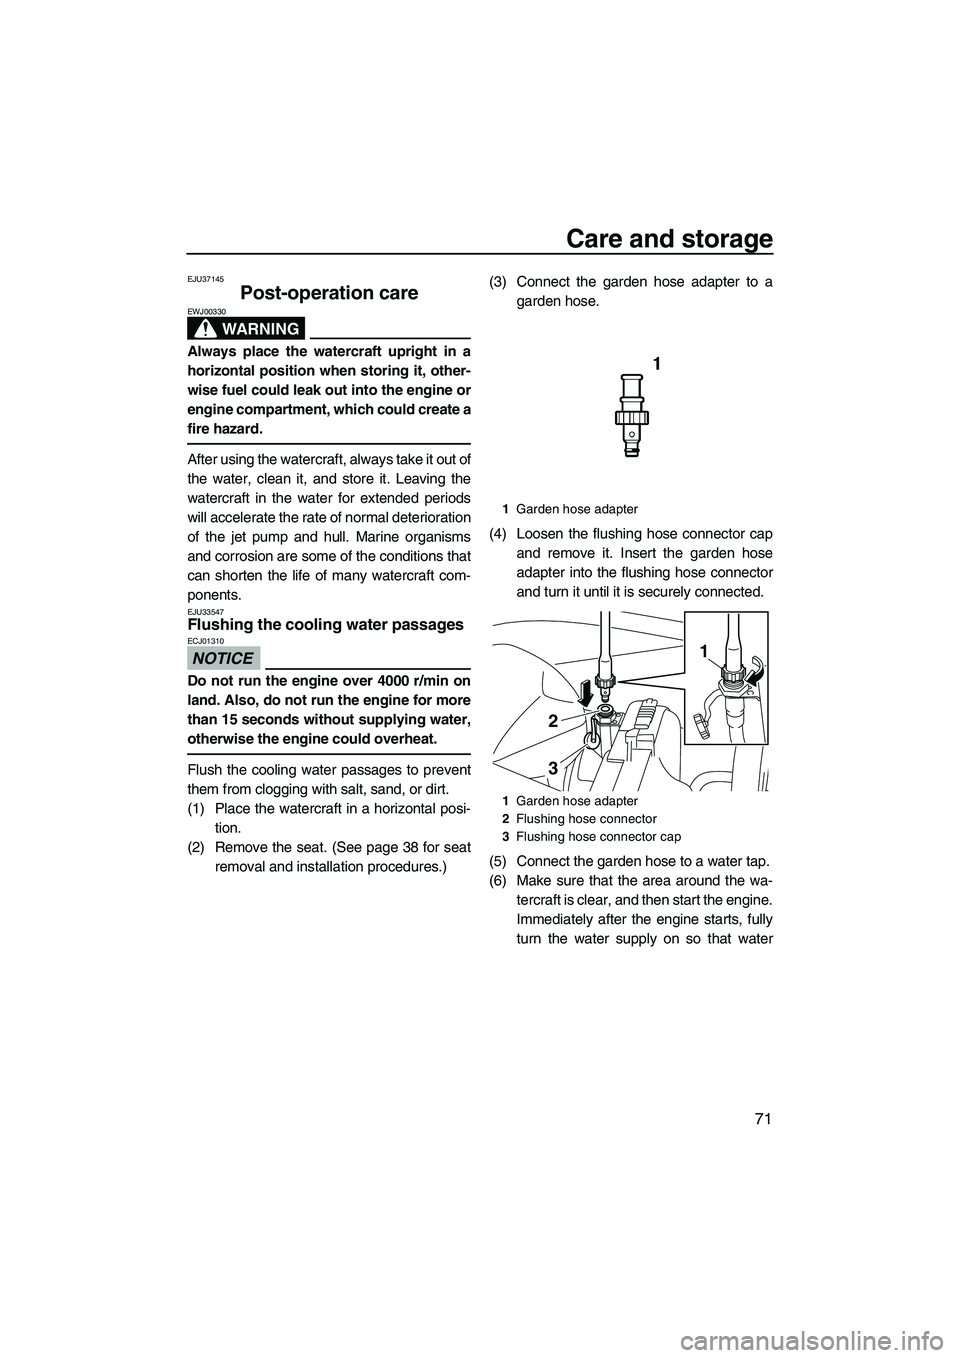 YAMAHA VXS 2012  Owners Manual Care and storage
71
EJU37145
Post-operation care 
WARNING
EWJ00330
Always place the watercraft upright in a
horizontal position when storing it, other-
wise fuel could leak out into the engine or
engi